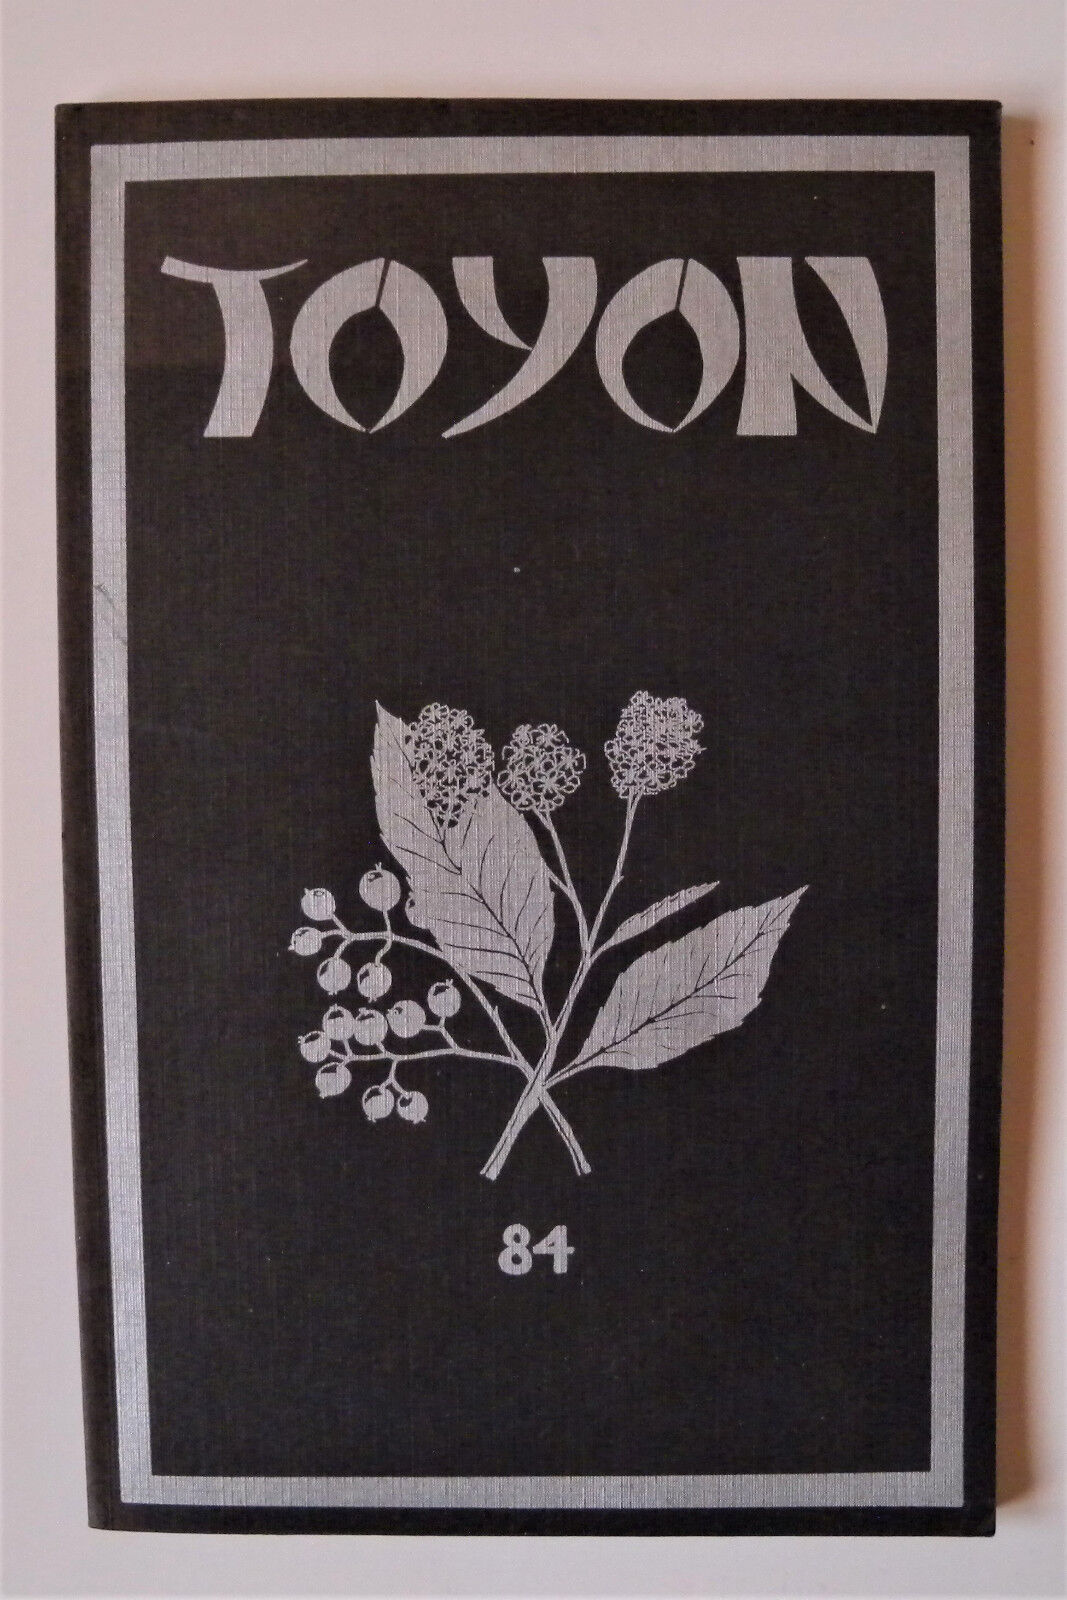 TOYON 84 The Annual Literary Journal of Humboldt State University Spring 1984